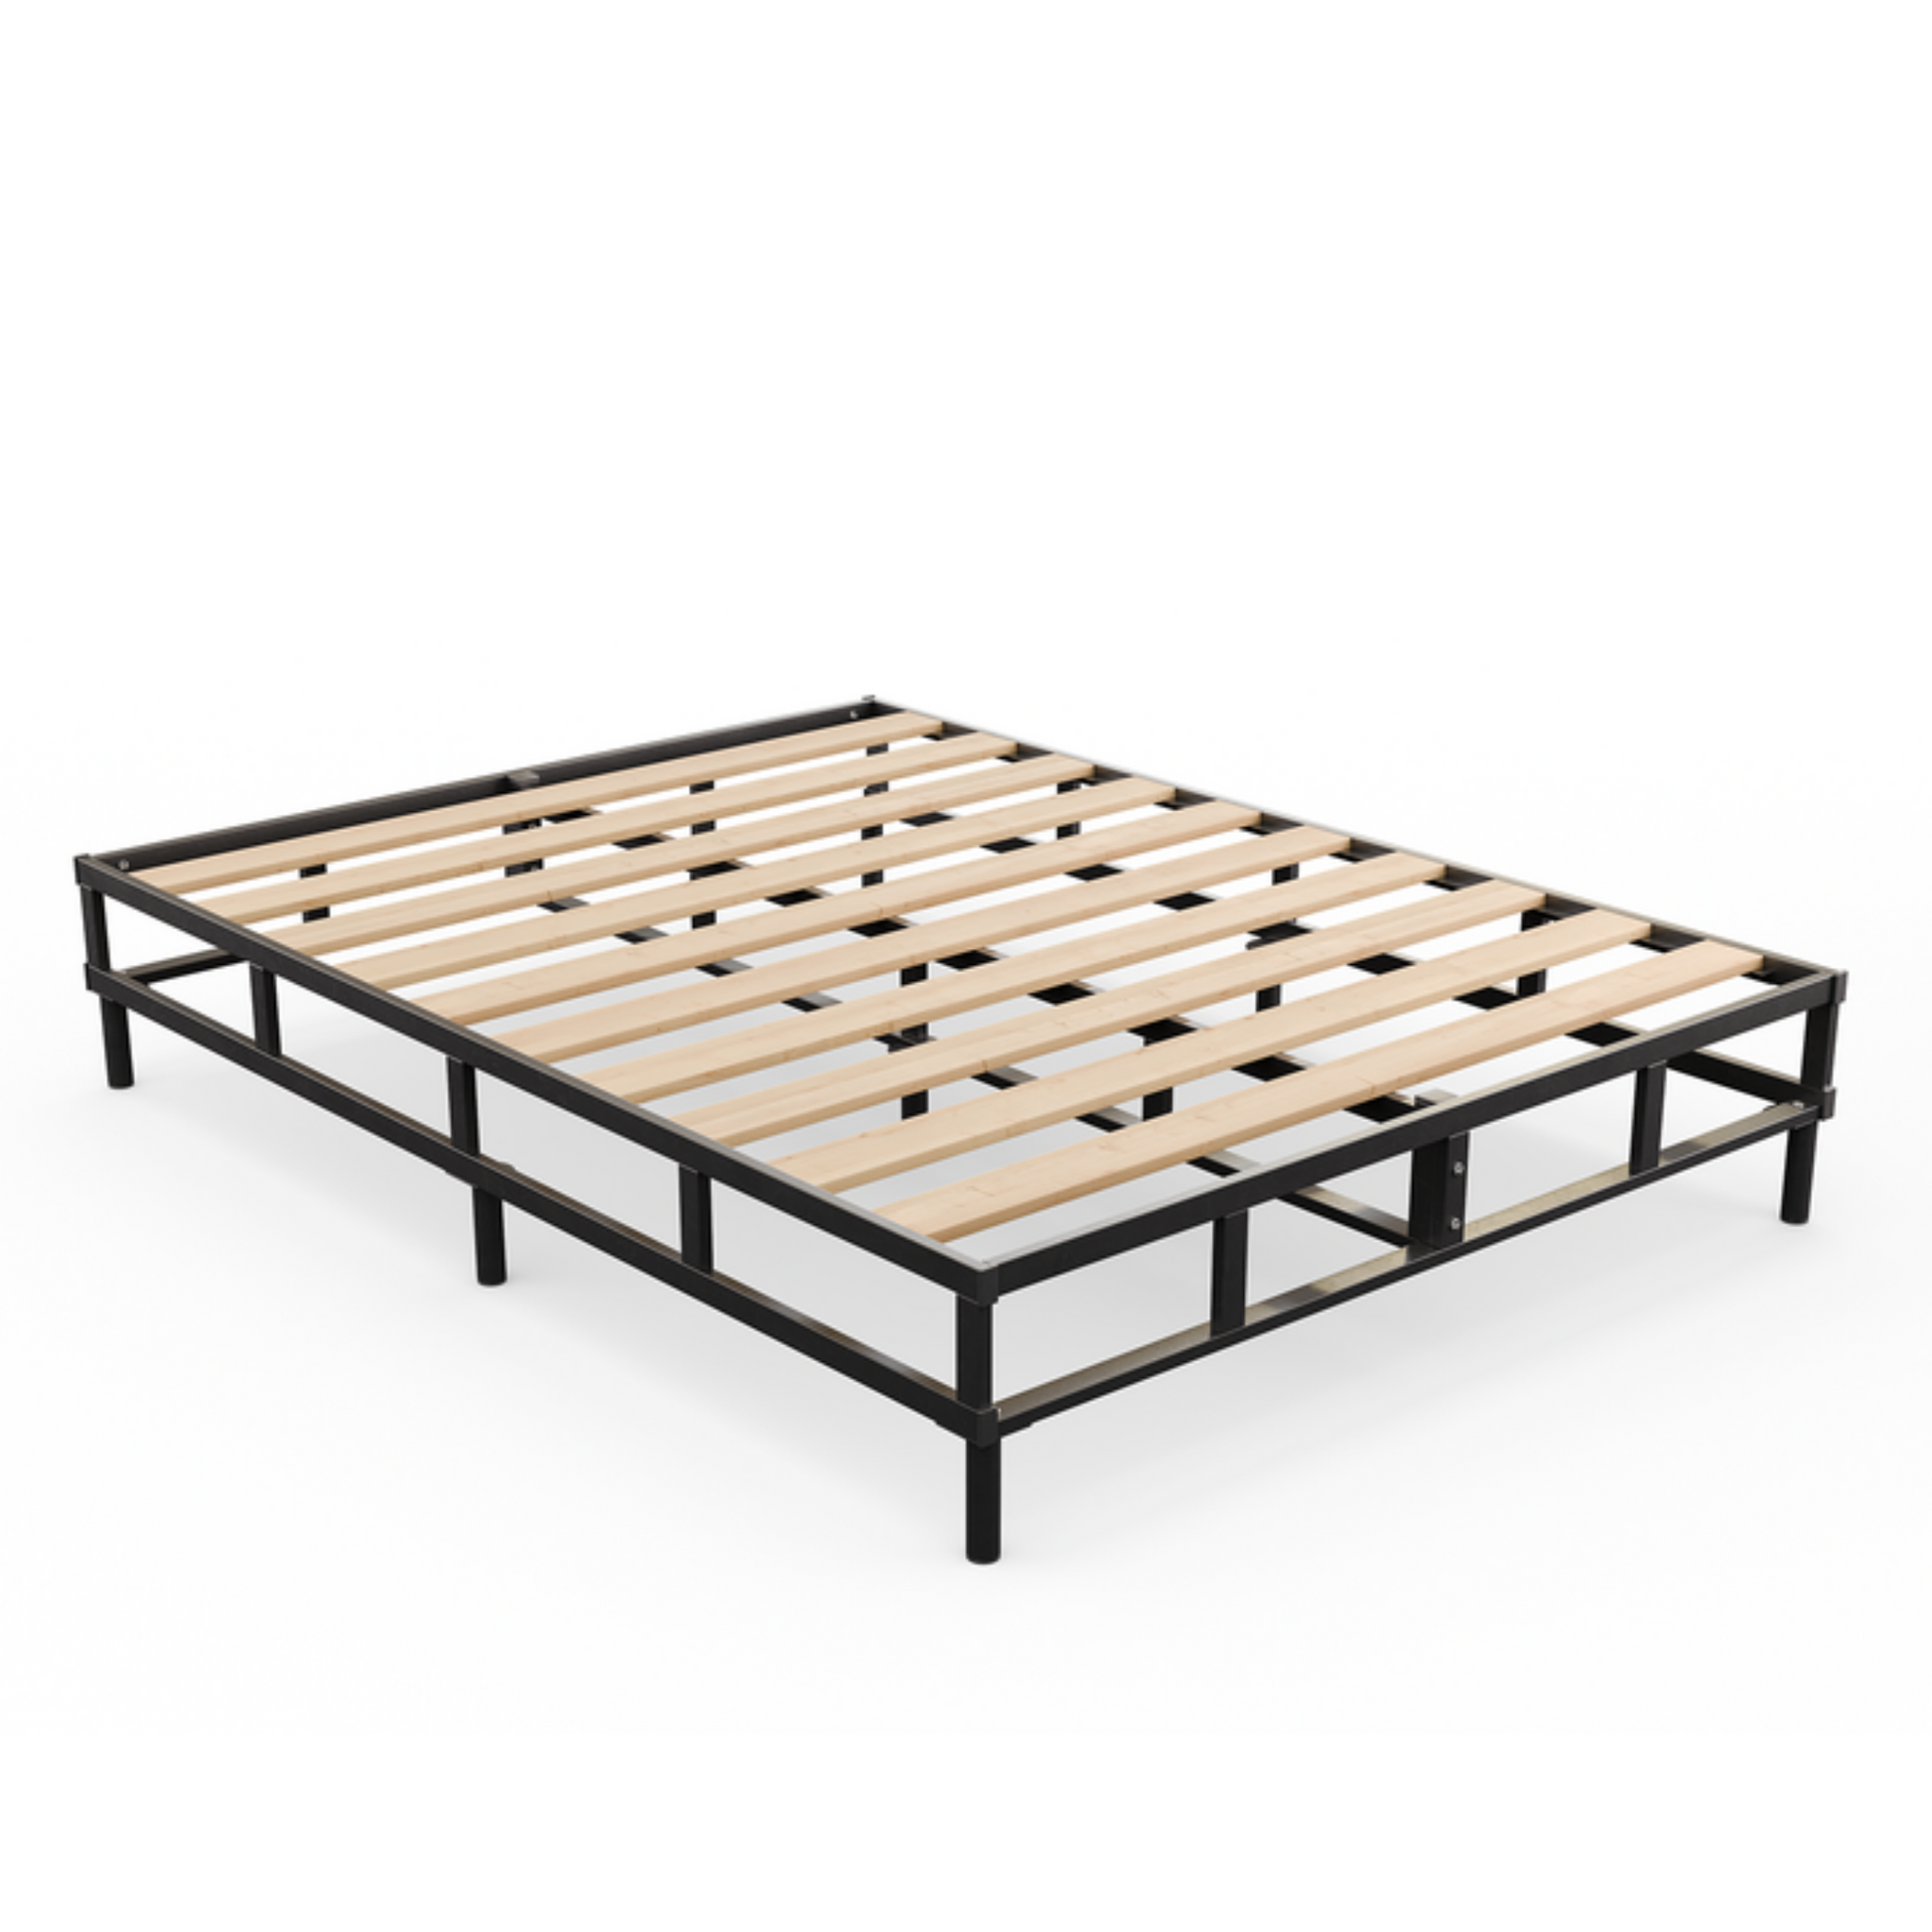 Doms 14" Box Spring With Legs, Detailed View